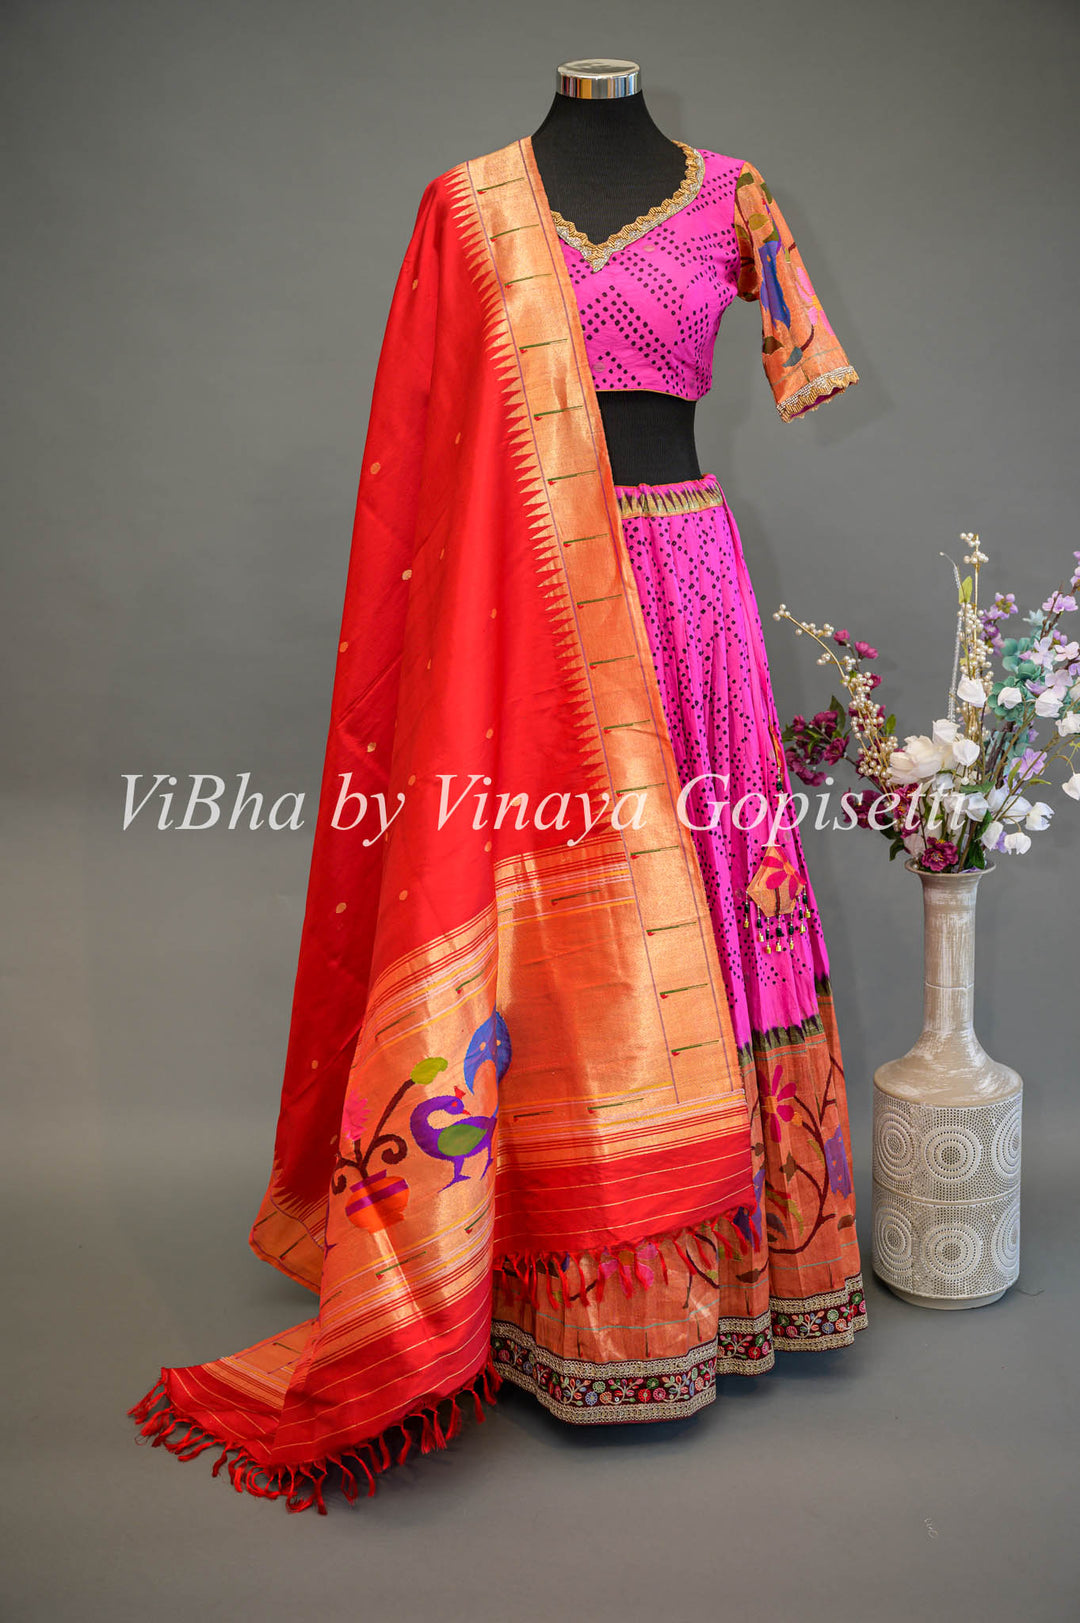 Hot Pink and Red Bandhani Paithani Silk Lehenga With Embroidered Borders And Red Paithani Silk Dupatta